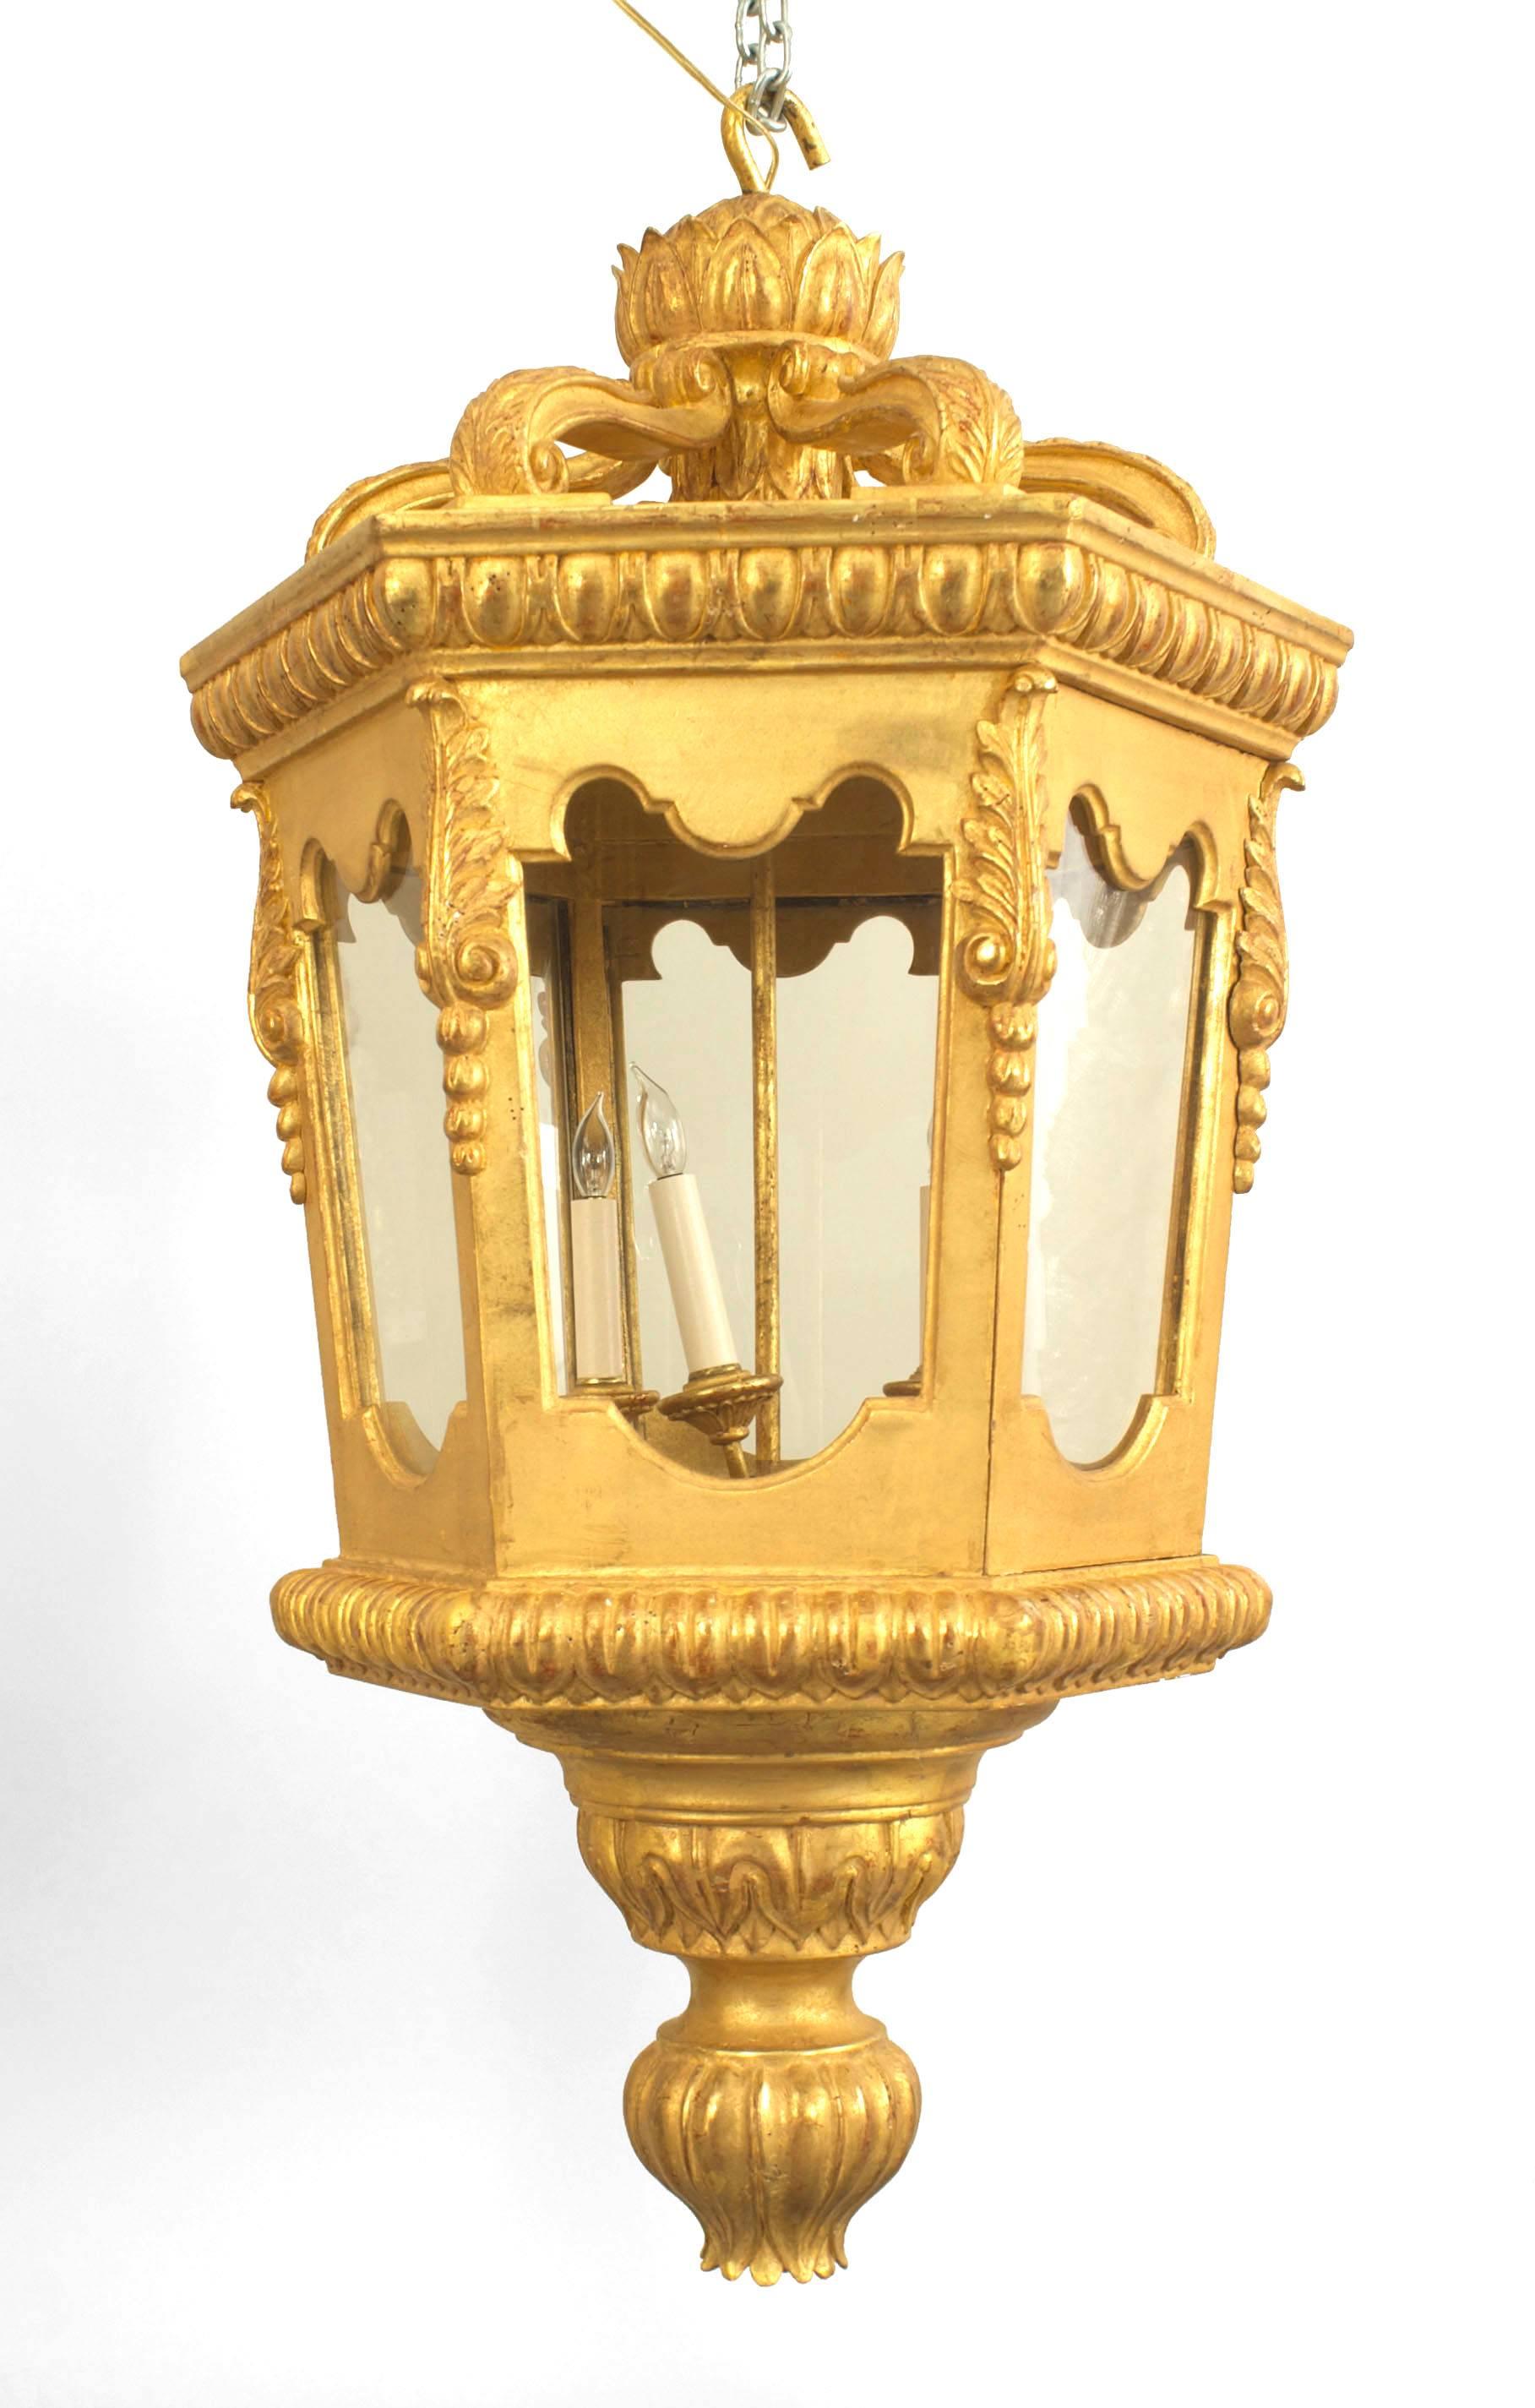 Two Italian Rococo-style (20th Century) gilt carved octagonal lanterns with shaped glass panels and a large fluted finial bottom (PRICED EACH)
